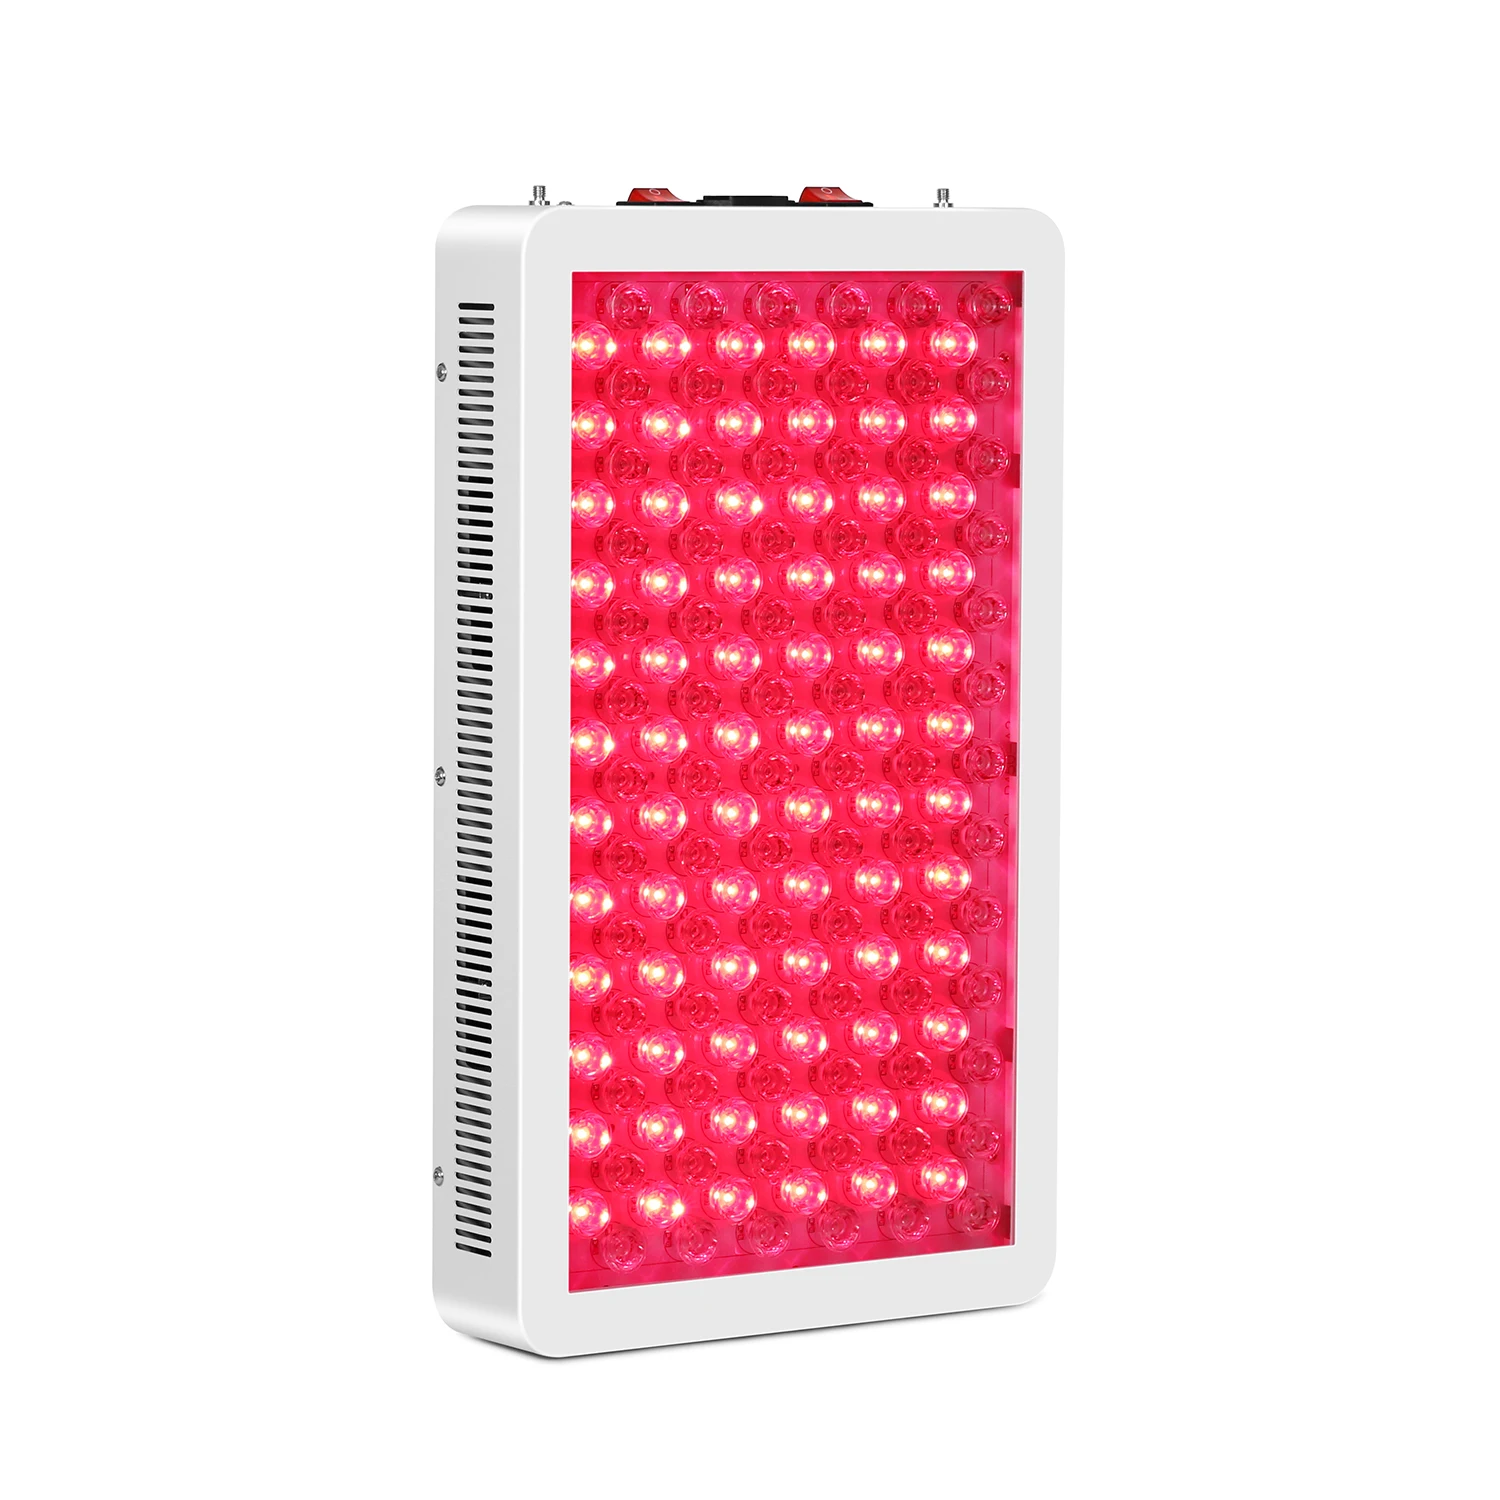 

SGROW New Item VIG750 Light slimming Skin rejuvenation device Near infrared 660nm 850nm Red Light Therapy Panel, N/a